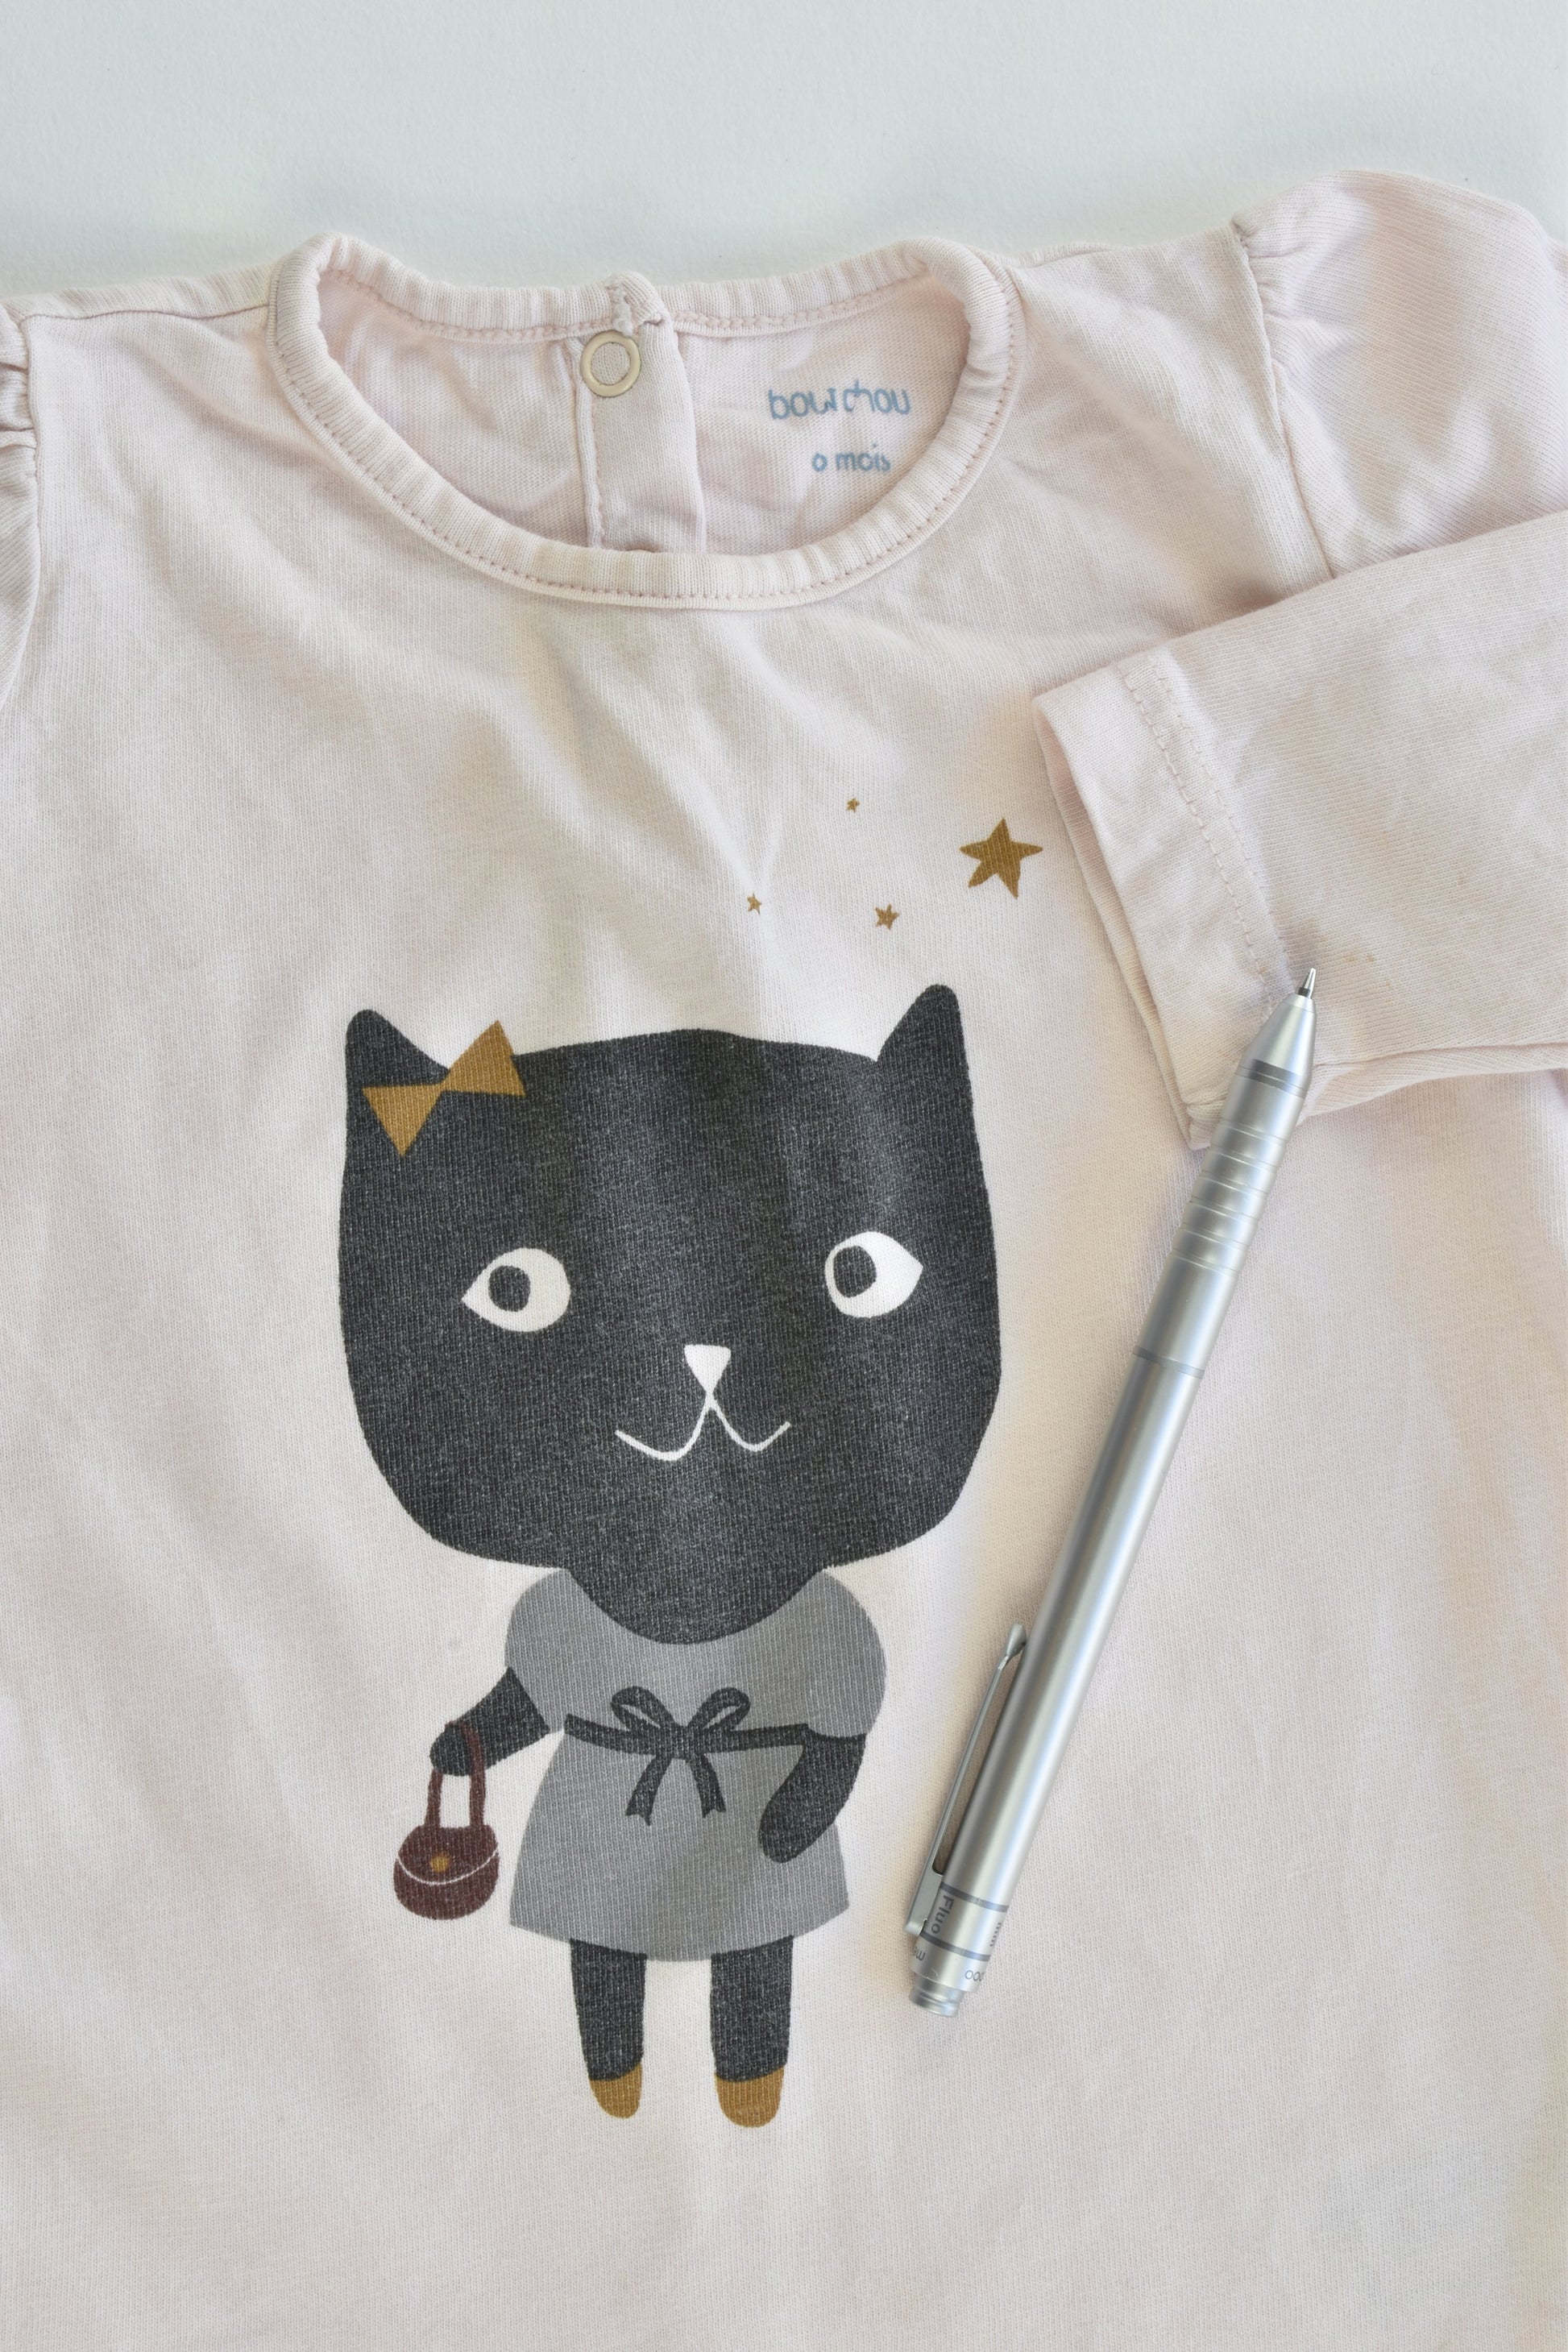 Bout'Chou (France) Size 00 (6 months) Cat Top